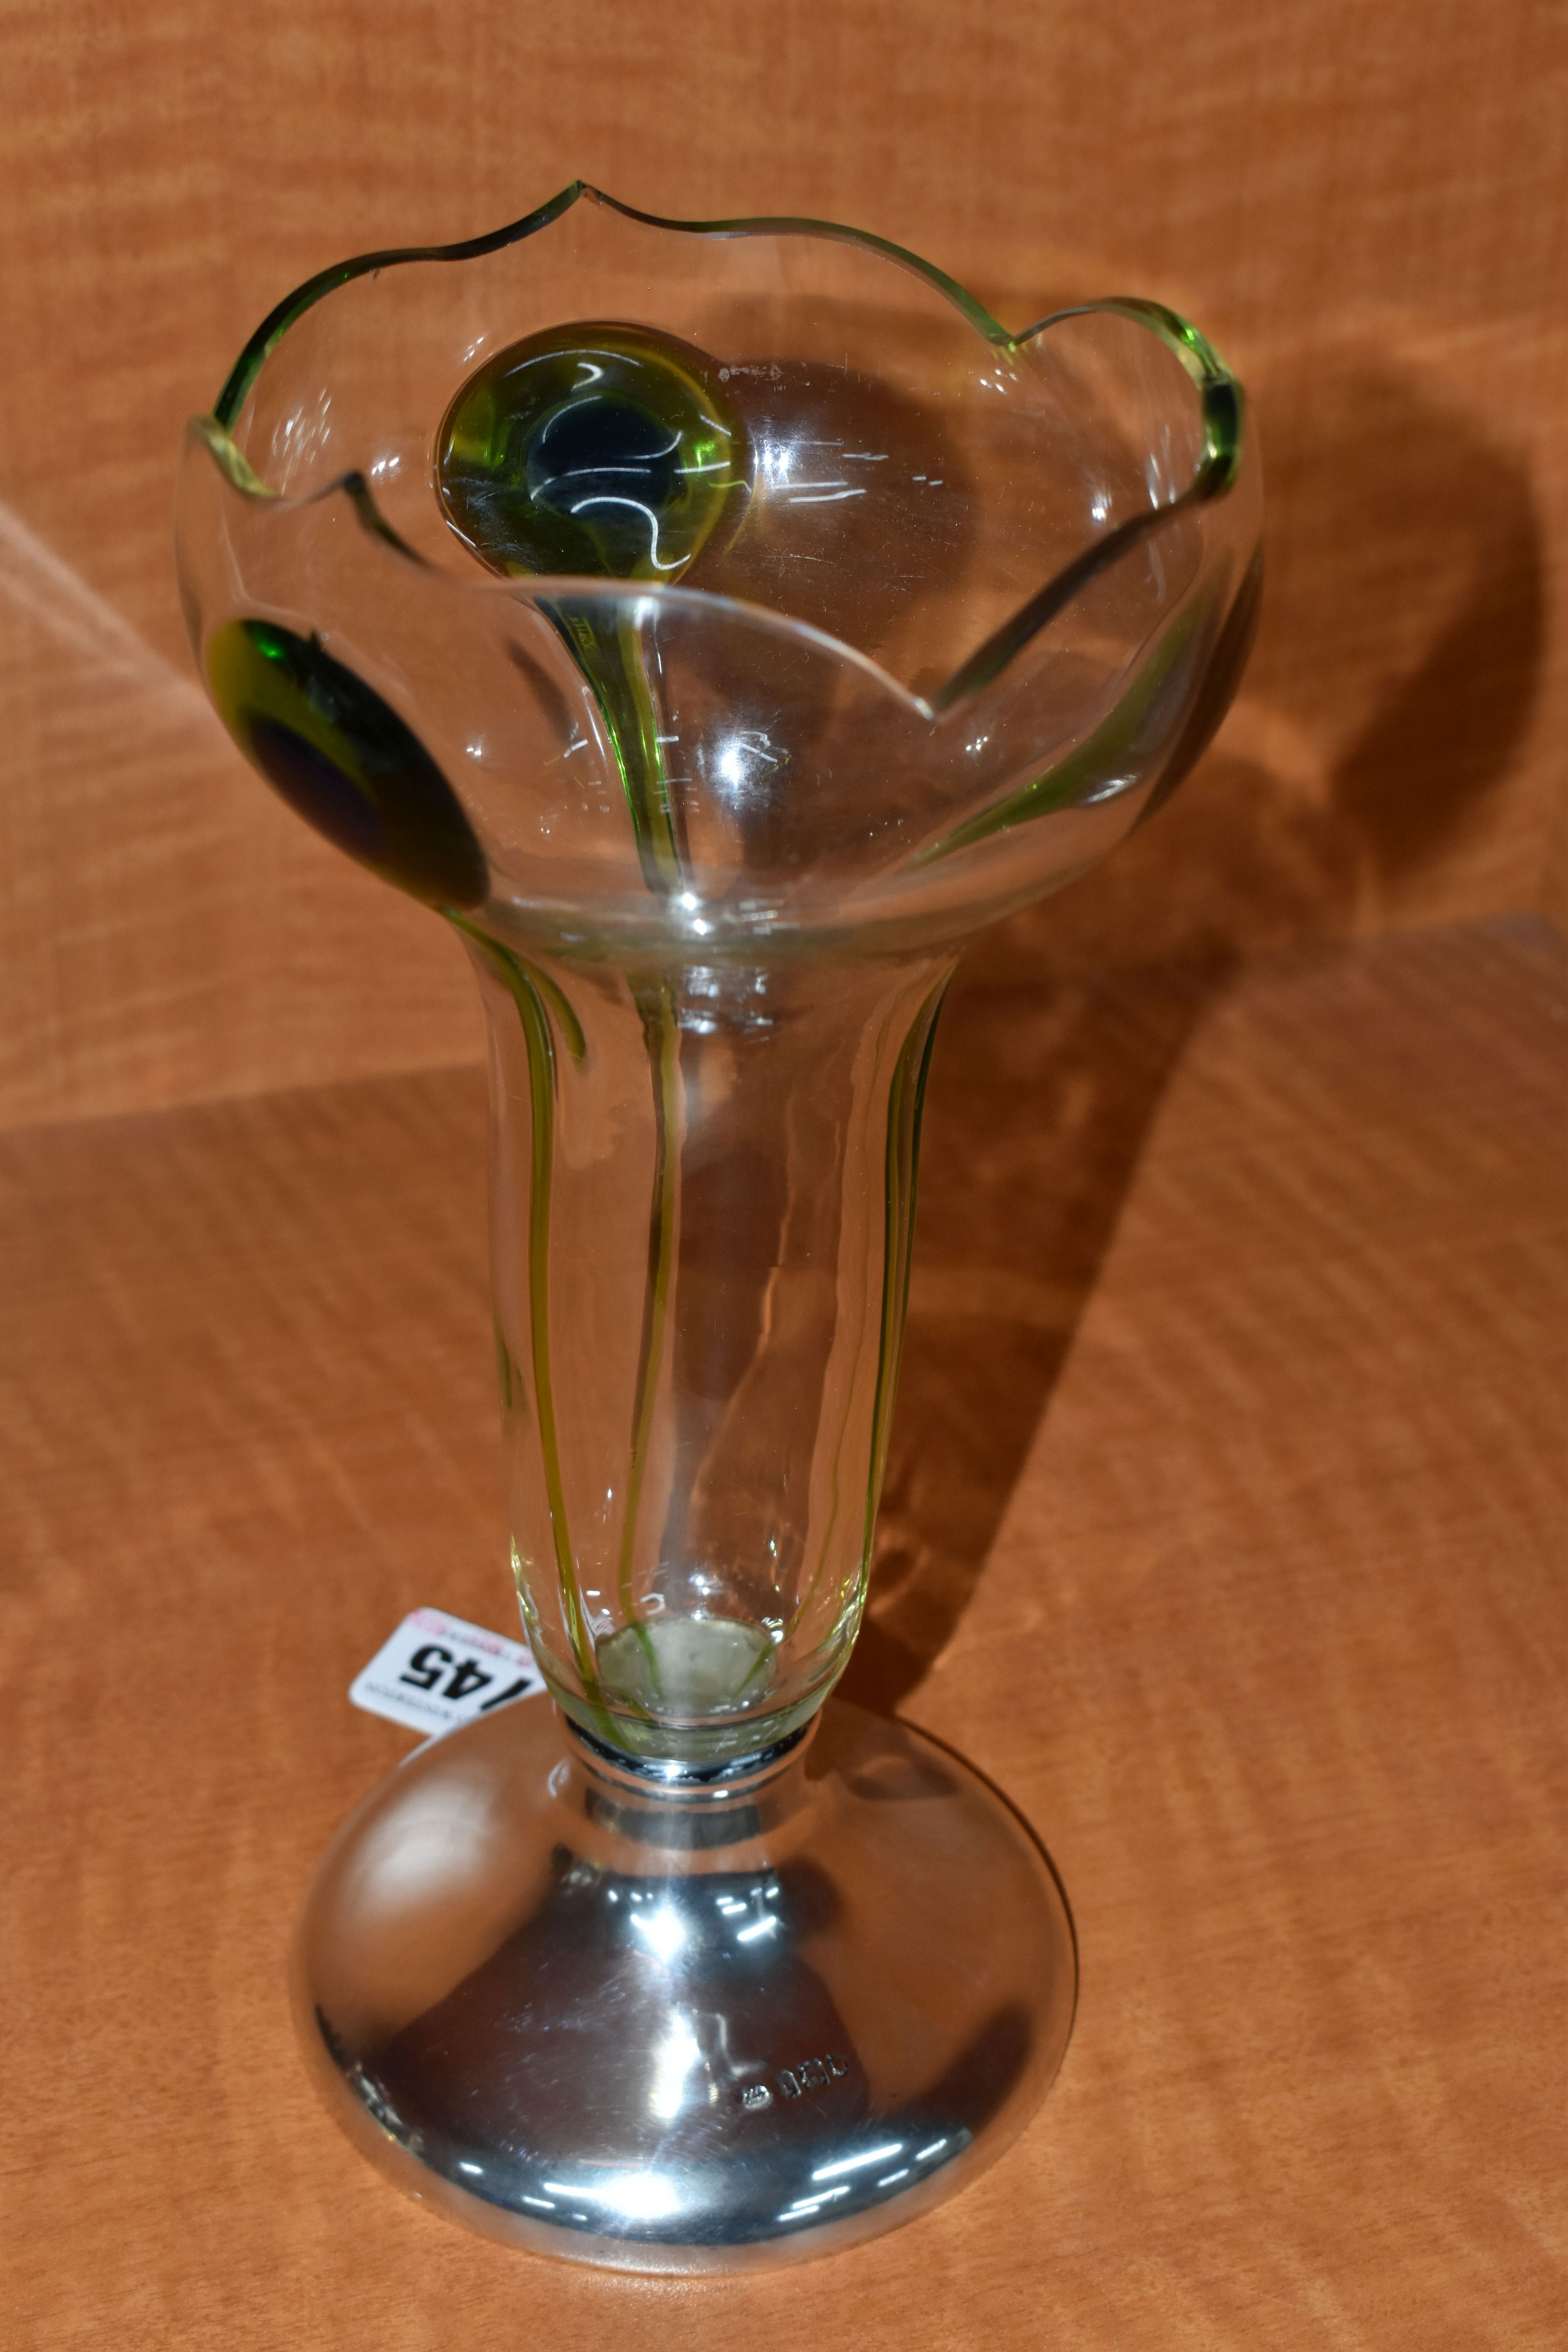 AN ART NOUVEAU SILVER MOUNTED CLEAR GLASS VASE WITH THREE GREEN AND BLUE PEACOCK FEATHER STYLE - Image 5 of 8